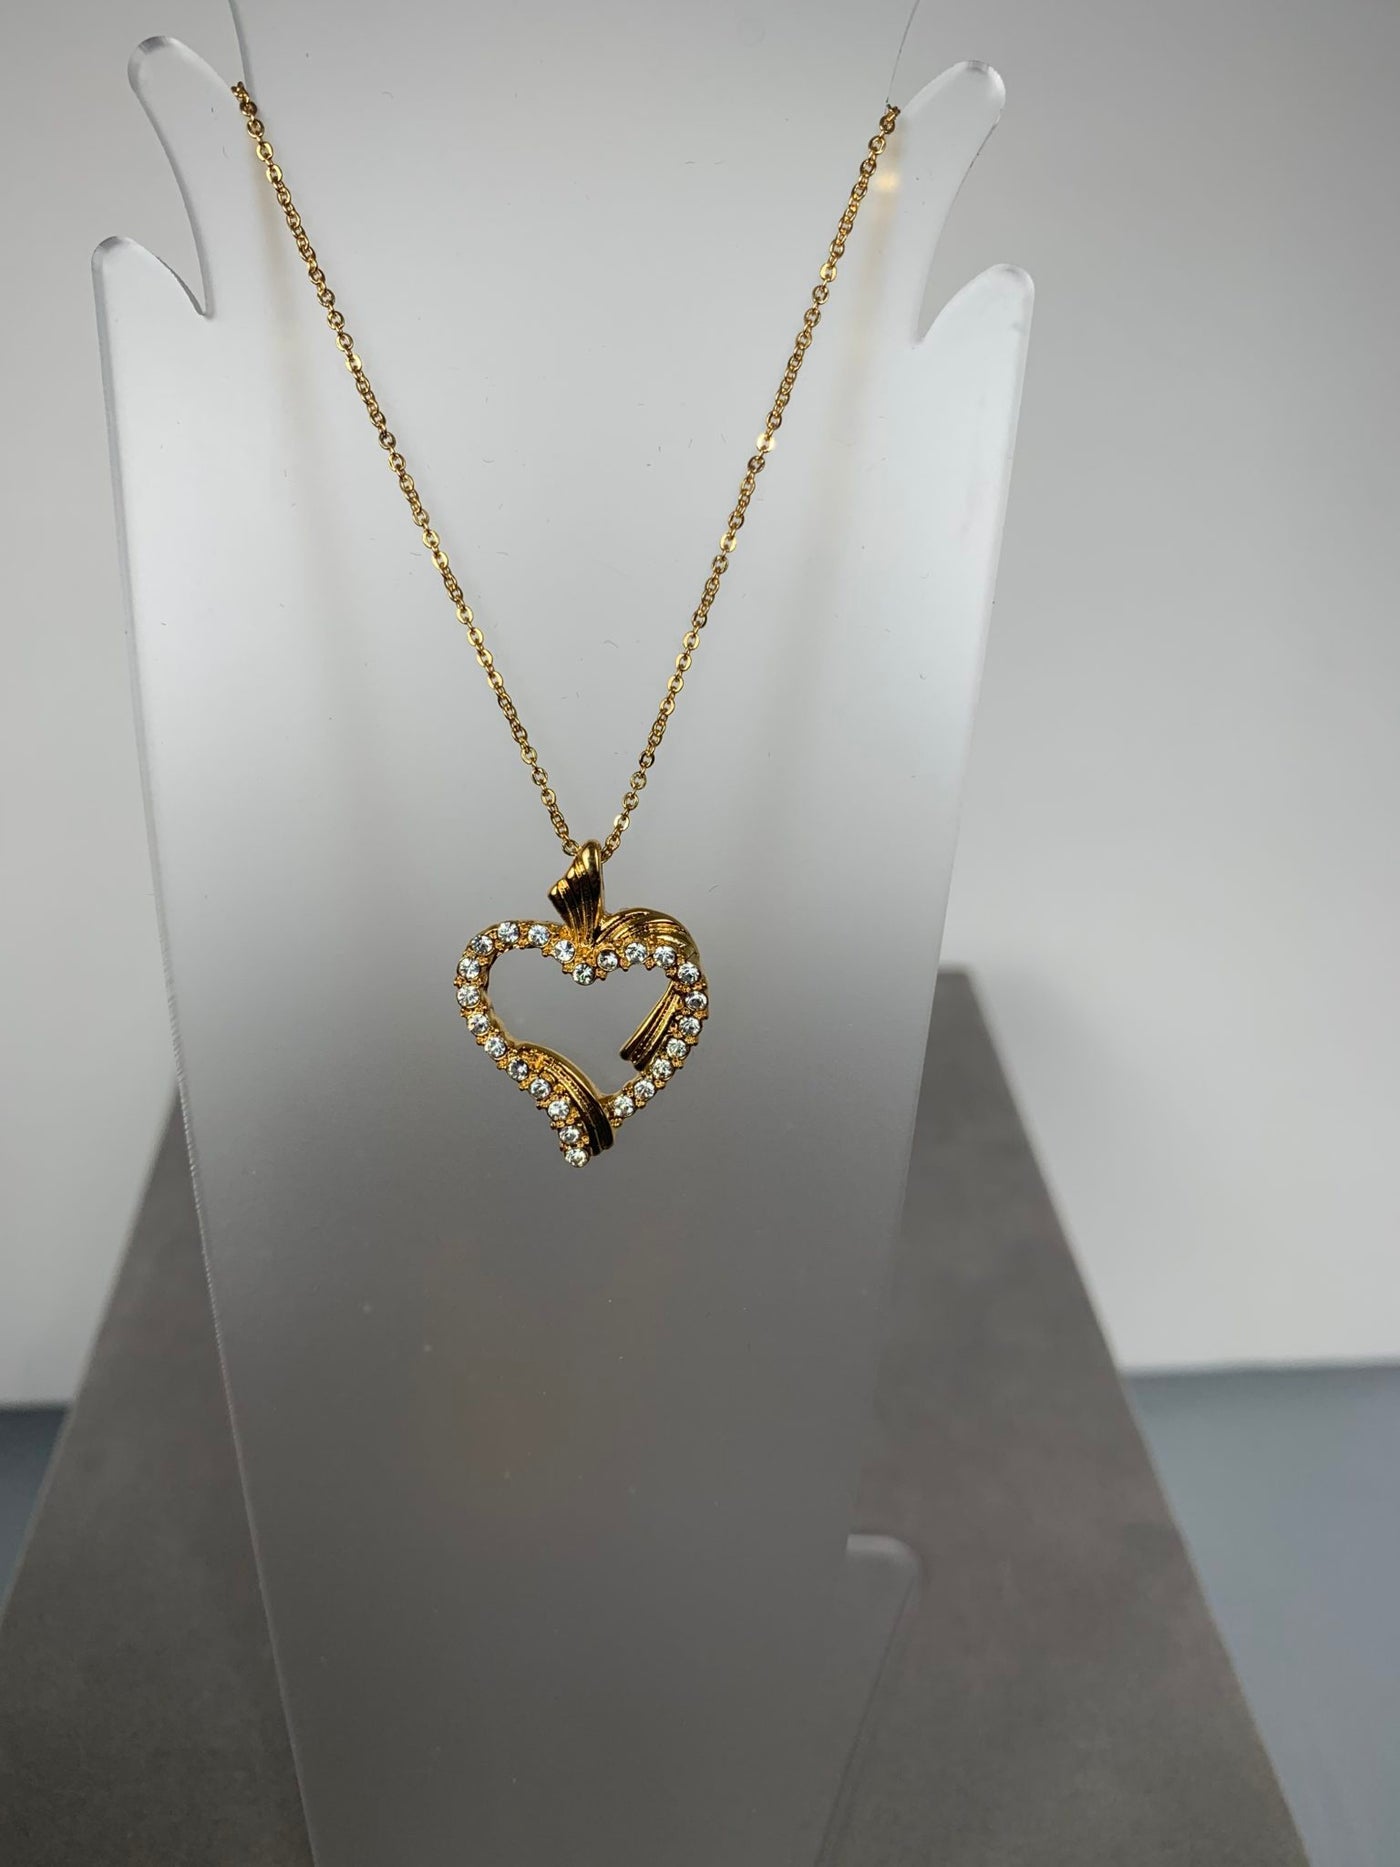 Yellow Gold Tone Artsy Crystal Heart Pendant Necklace